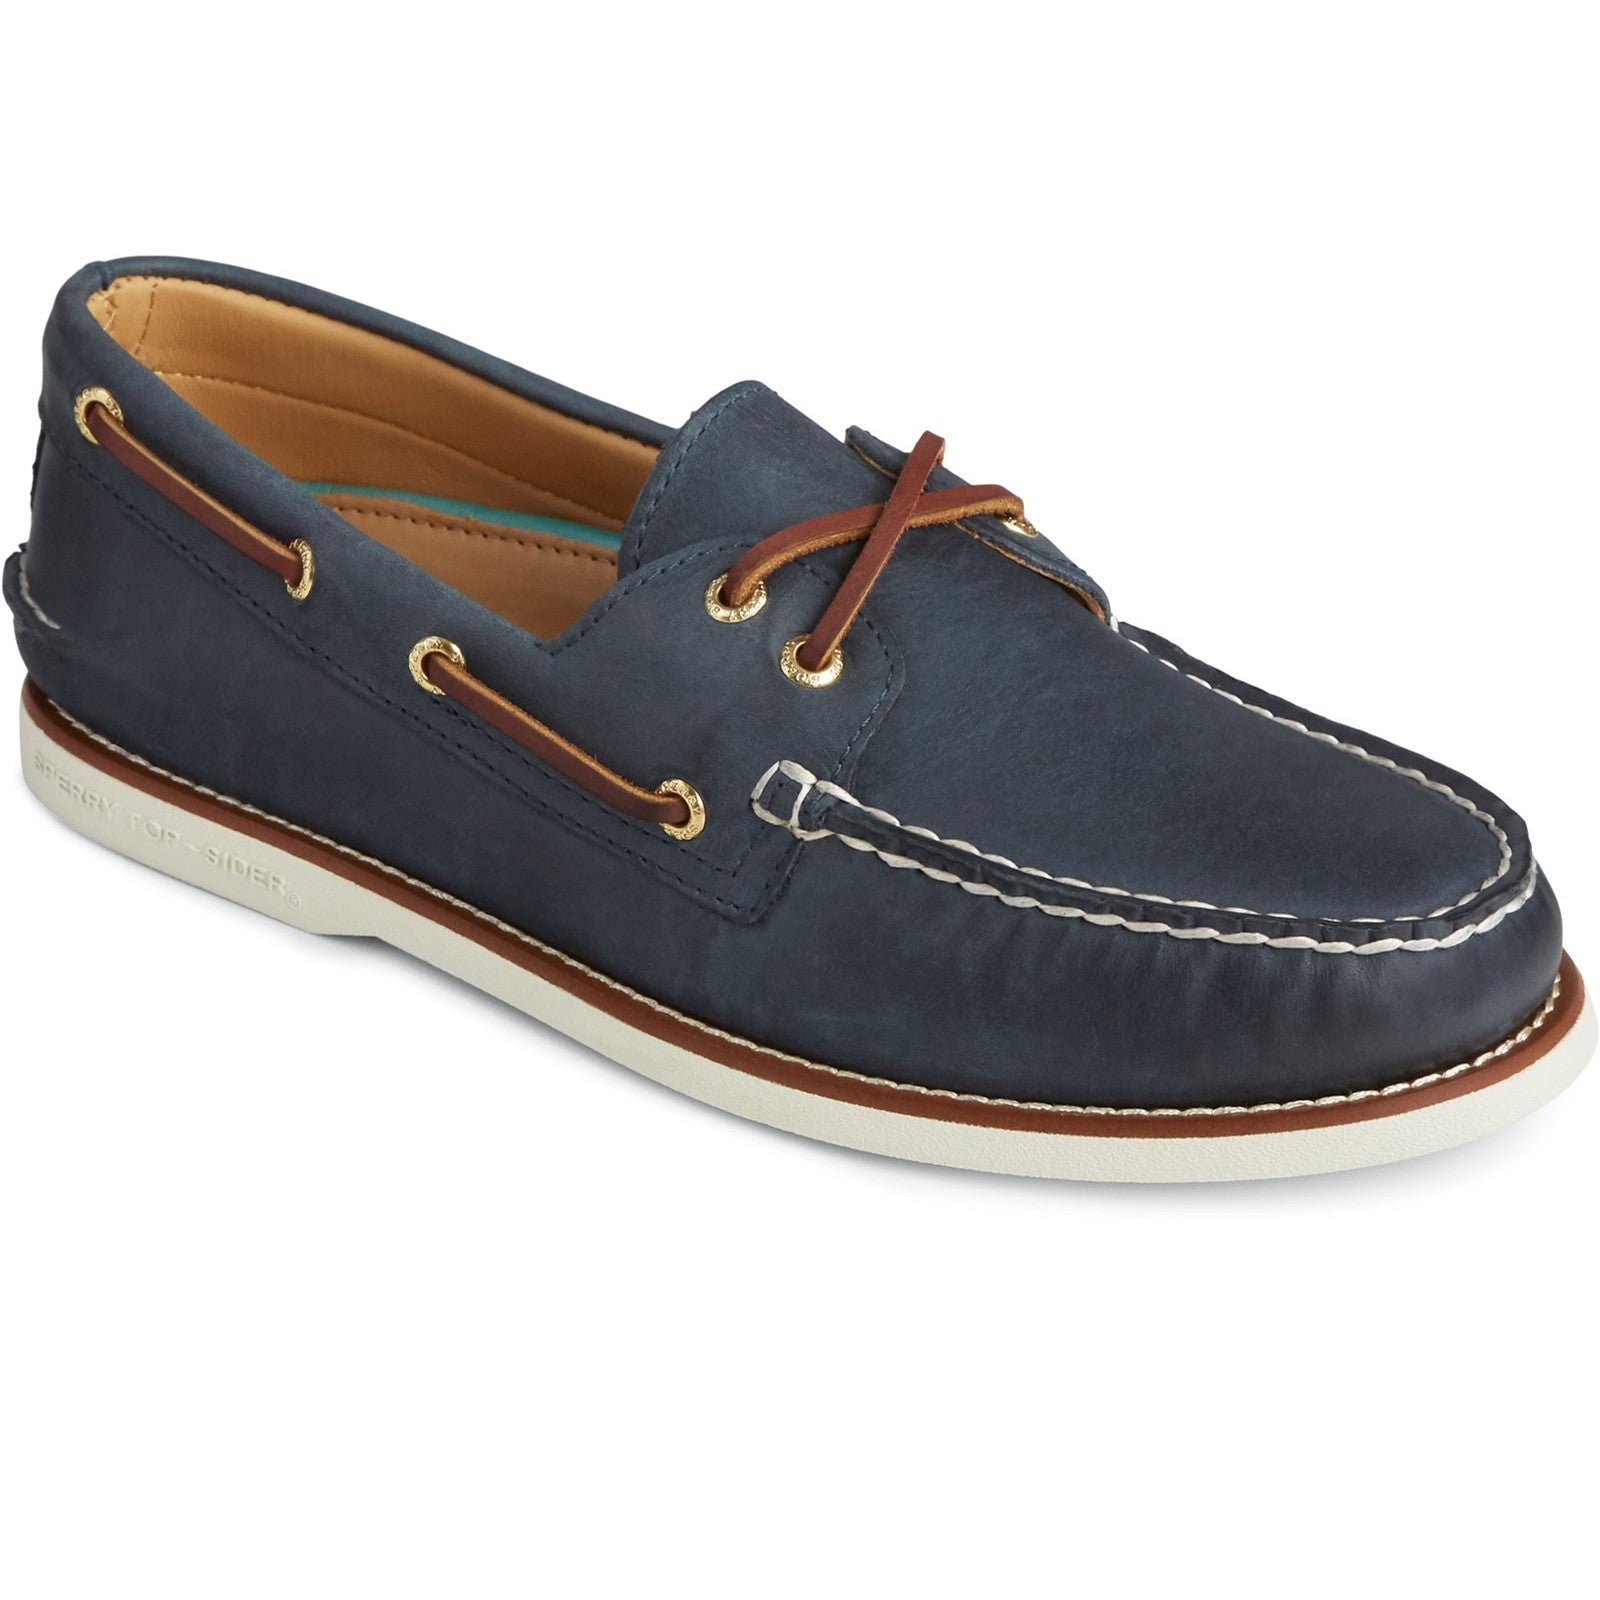 Sperry Mens Gold Cup Authentic Original Boat Shoes - Navy